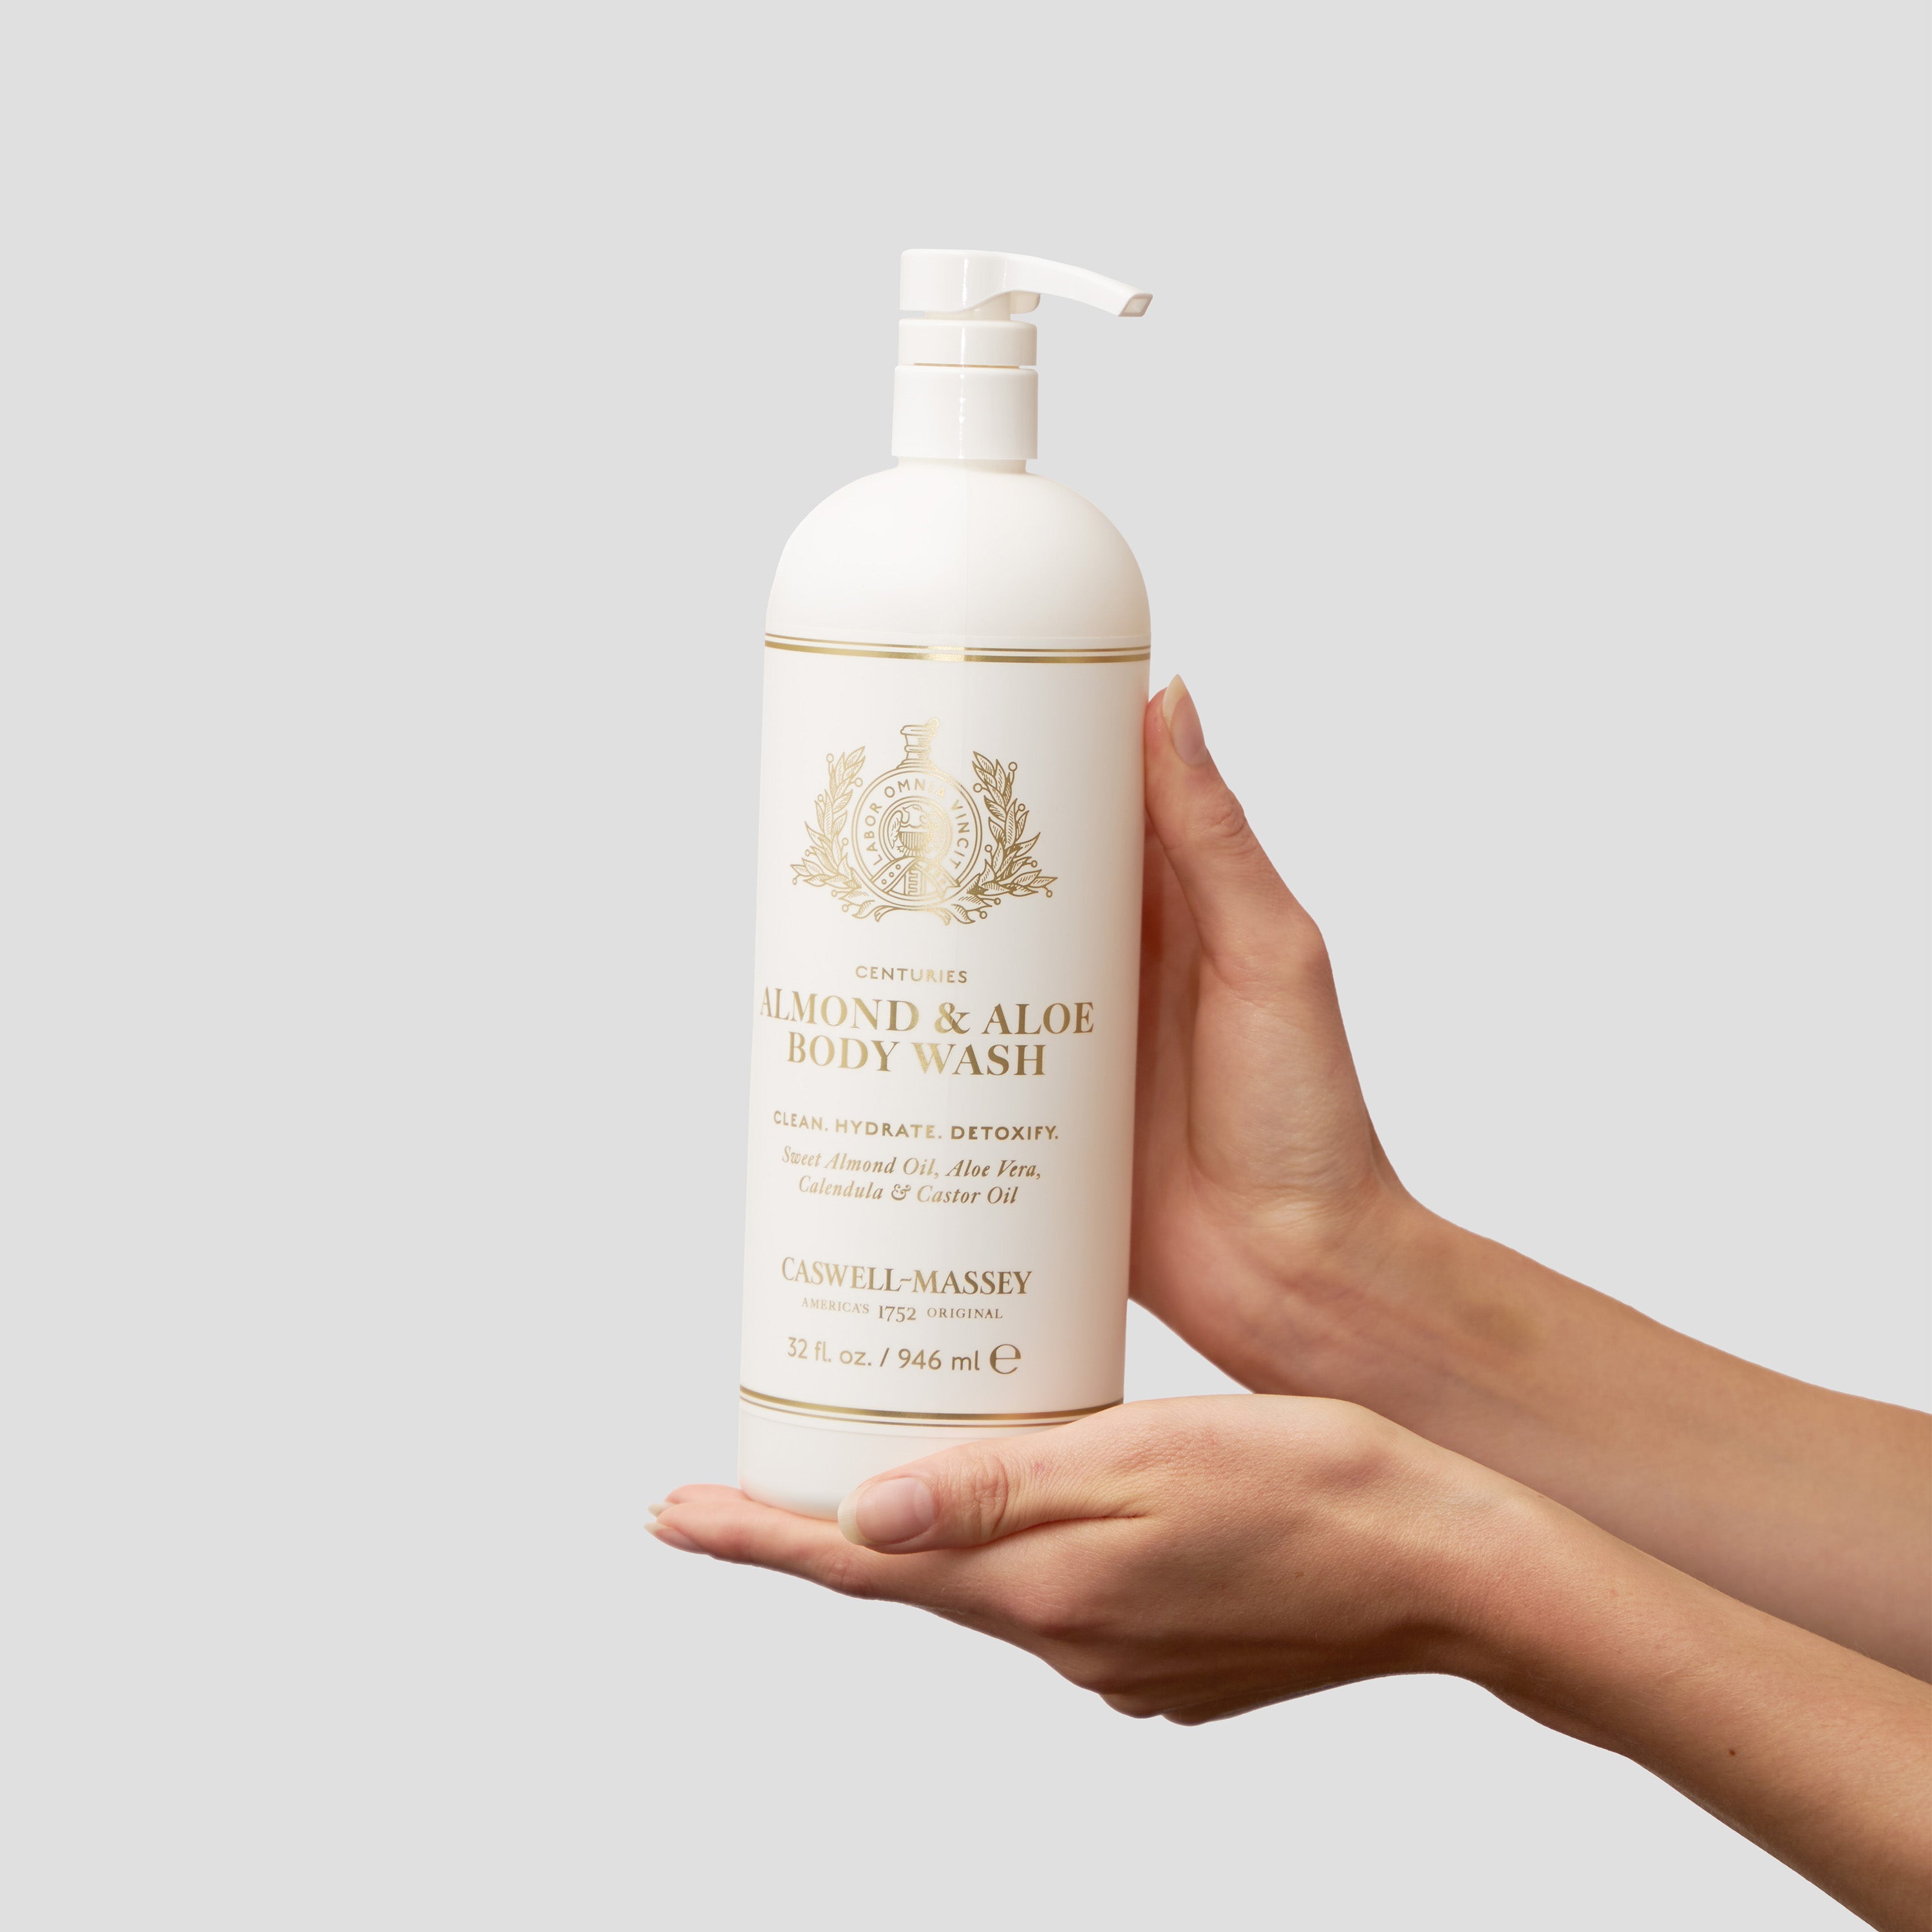 Almond and Aloe Body Wash held in hand